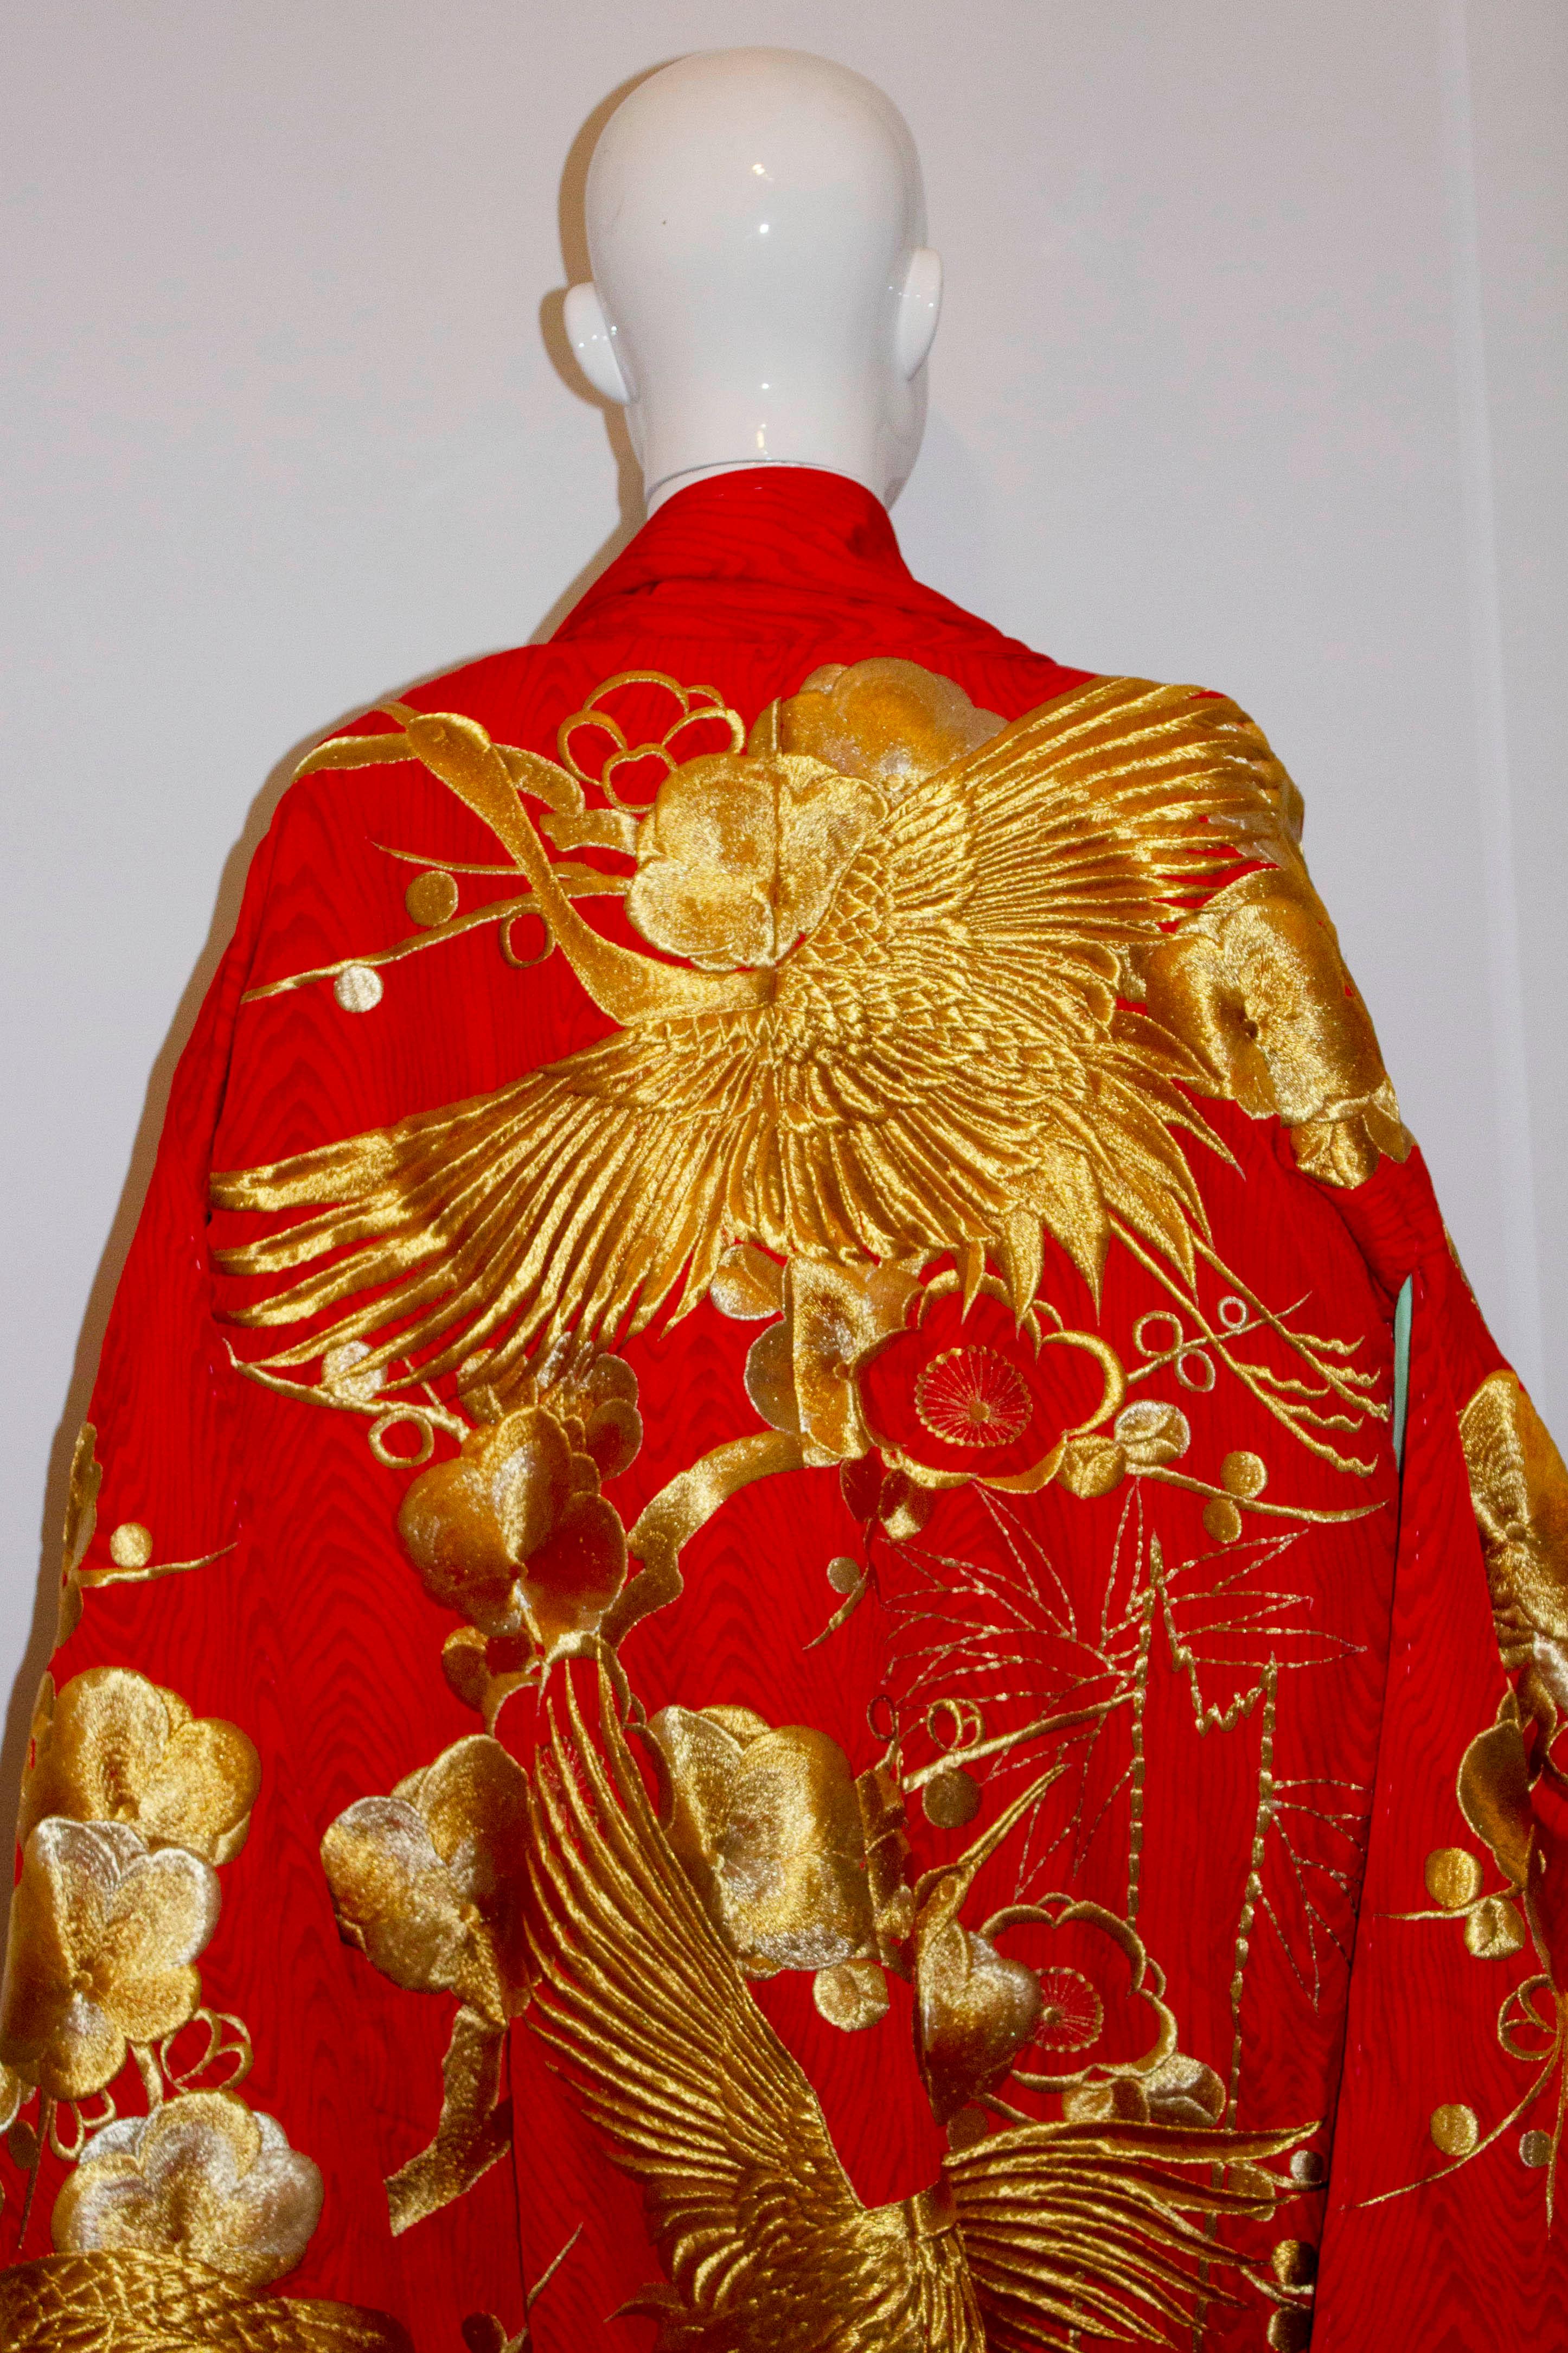 A stunning wedding kimono dating from the 1980s . In red shot silk with gold thread detail in the design of Cranes, Ume,/ Plum Blossom and Bamboo. Cranes mate for life and so are an auspicious symbol for a wedding kimono as they symbolize a long and